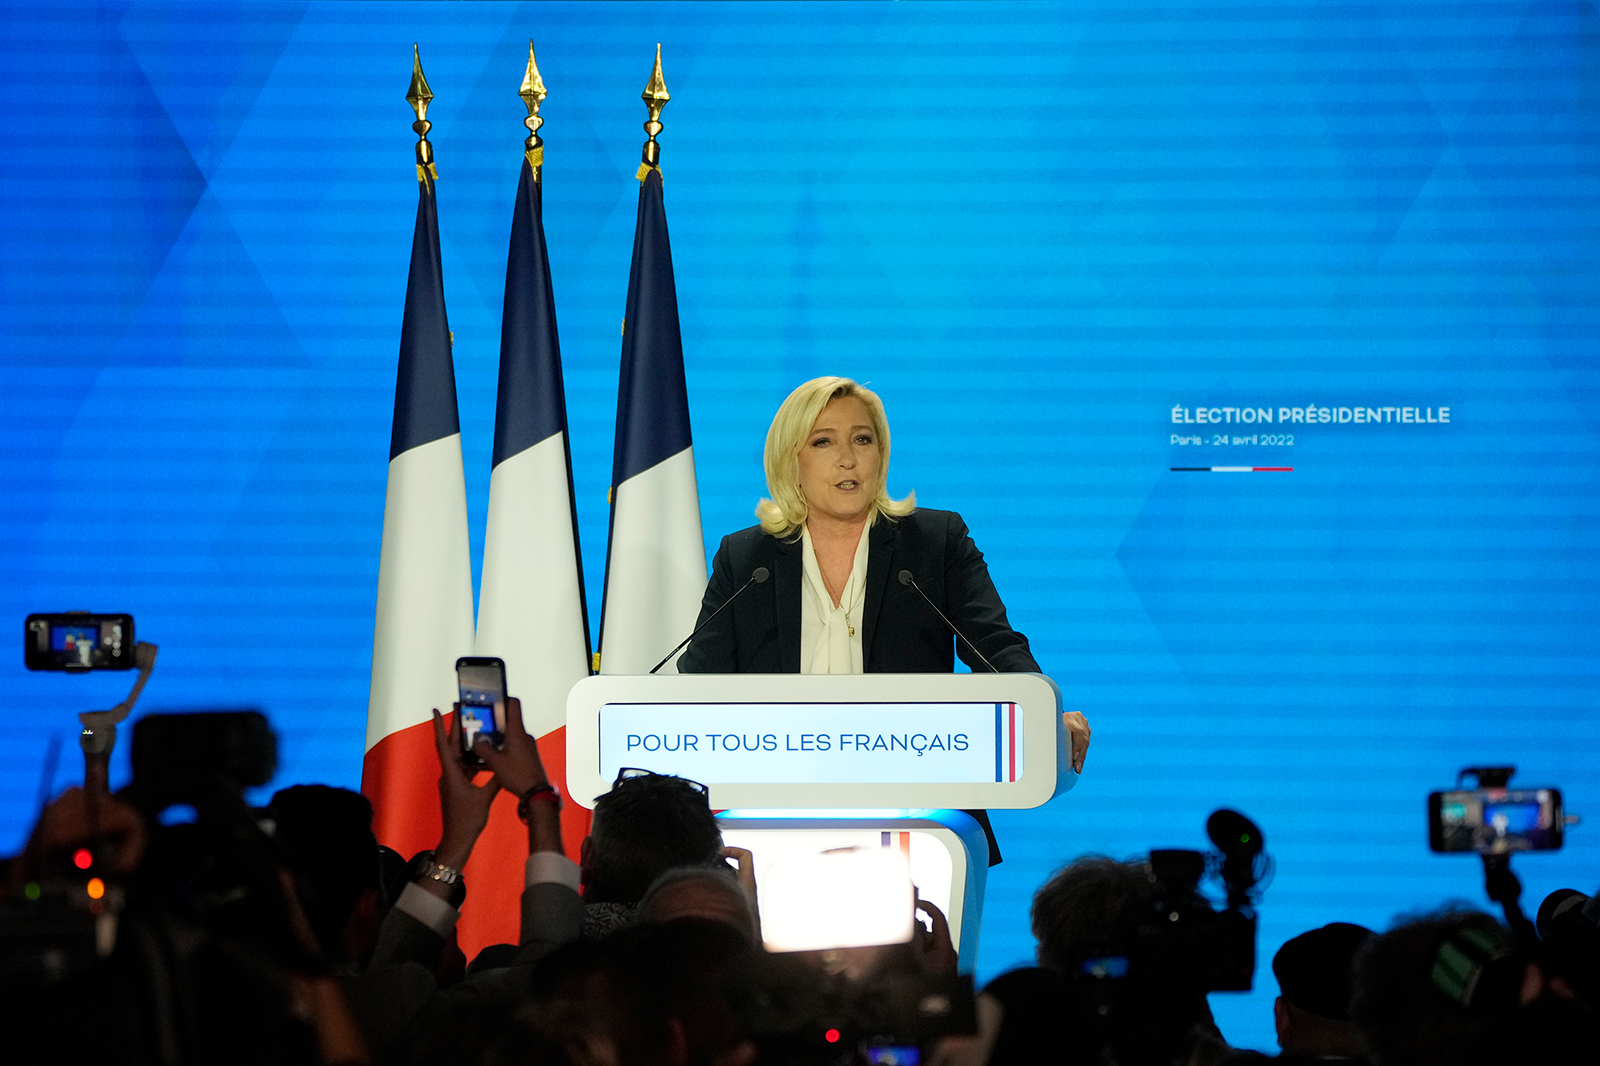 Far-right leader Marine Le Pen speaks after the early result projections of the French presidential election runoff were announced in Paris, Sunday, April 24.